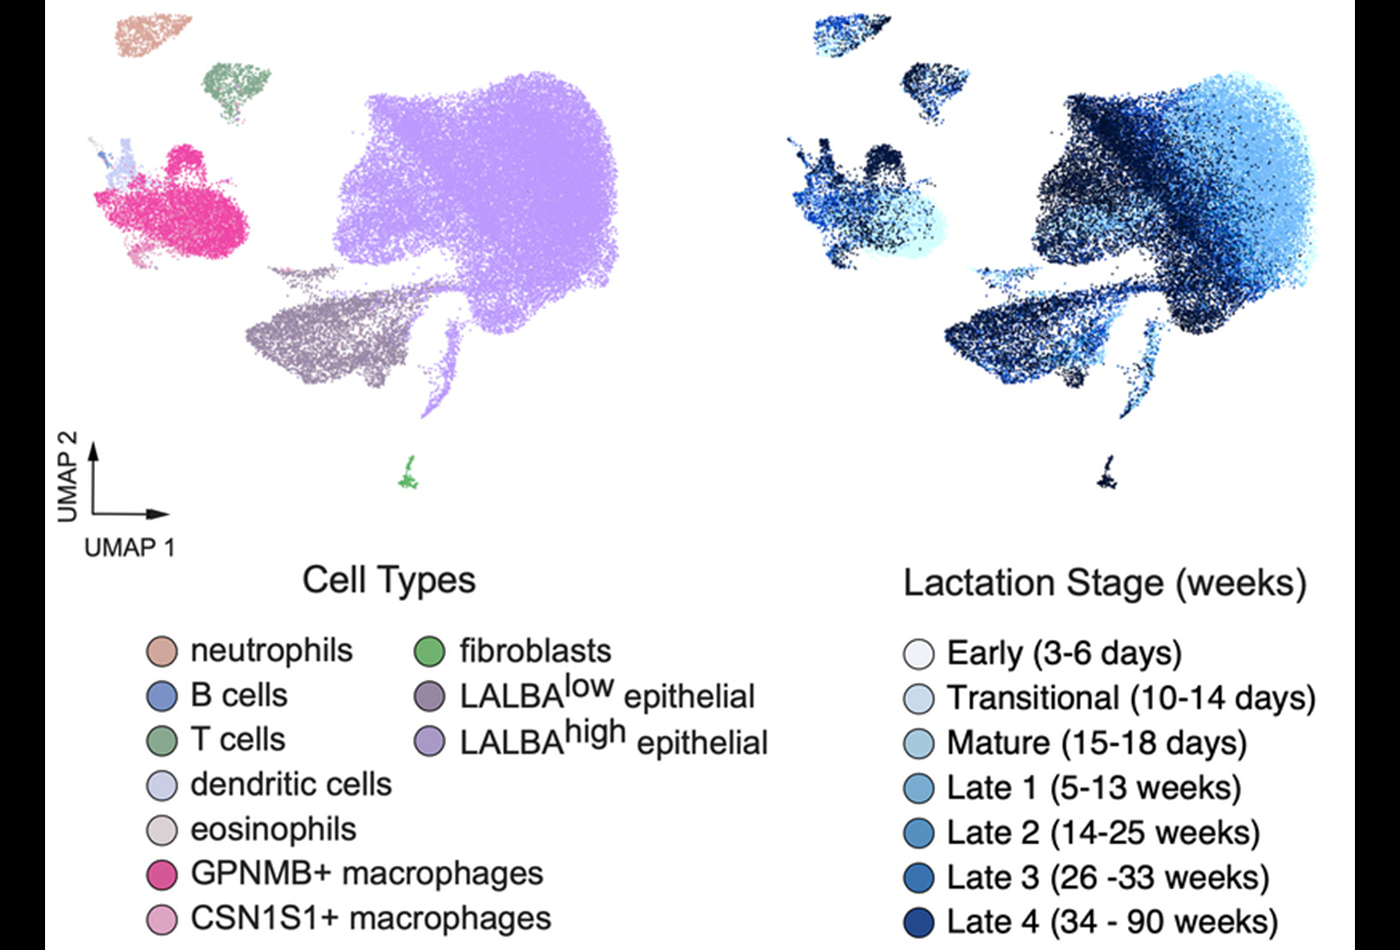 Clusters of colored dots with coded key below, text reads: Cell types: neutrophils, B cells, T cells, dendritic cells, eosinophils, GPNMB+ macrophages, CSN1S1+ macrophages, fibroblasts, LALBA low epithelial, LALBA high epithelial. Lactation Stage (weeks): Early (3-6 days), Transitional (10-14 days), Mature (15-18 days), Late 1 (5-13 weeks), Late 2 (14-25 weeks), Late 3 (26-33 weeks), Late 4 (34-90 weeks)